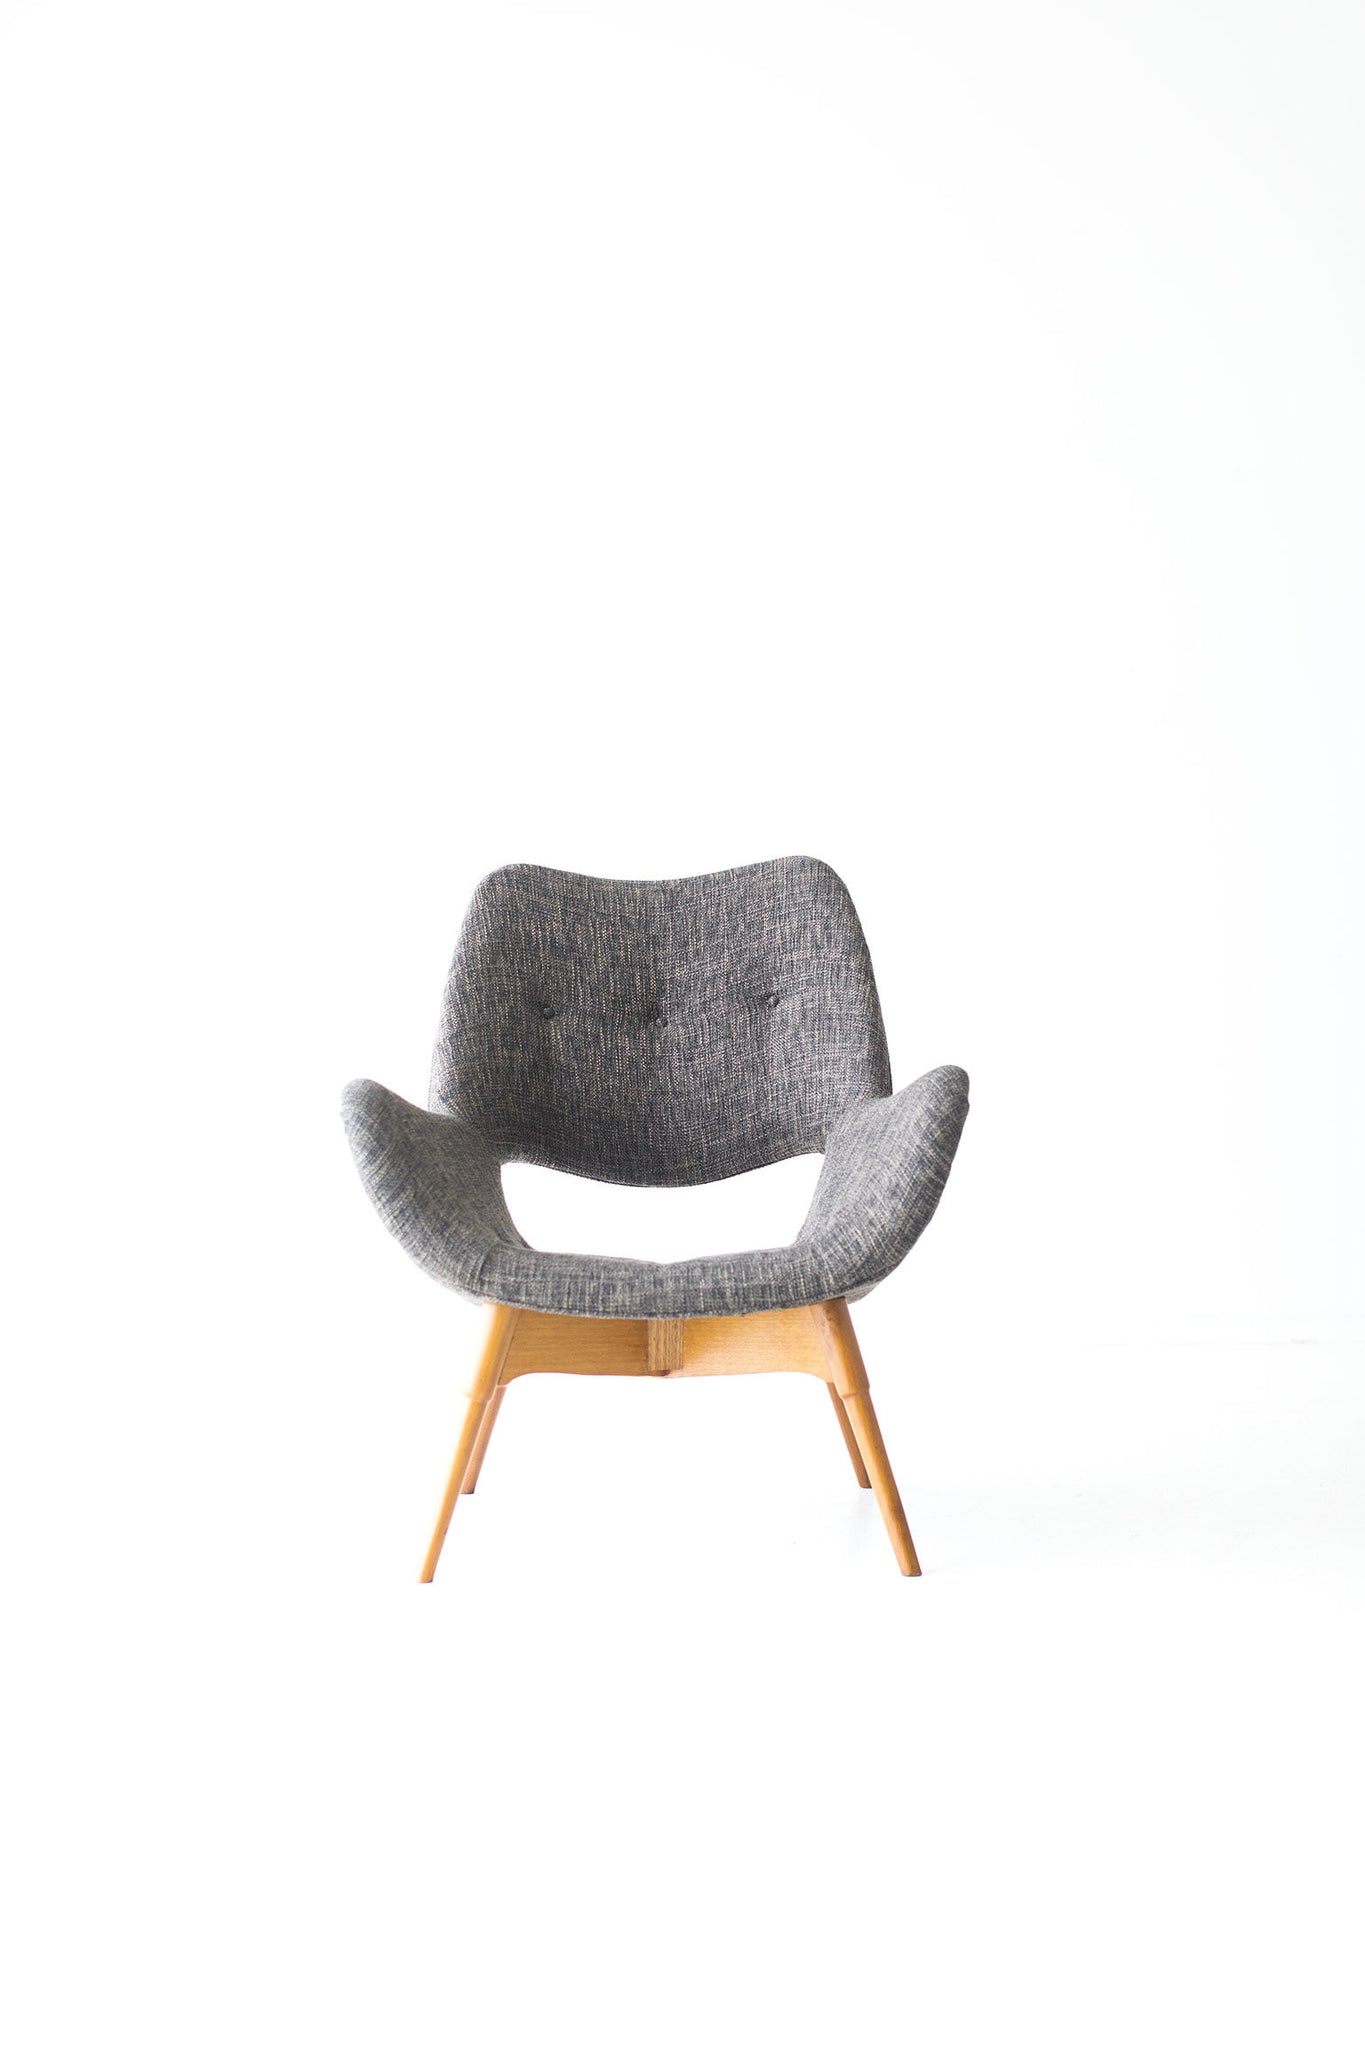 grant-featherston-lounge-chair-04